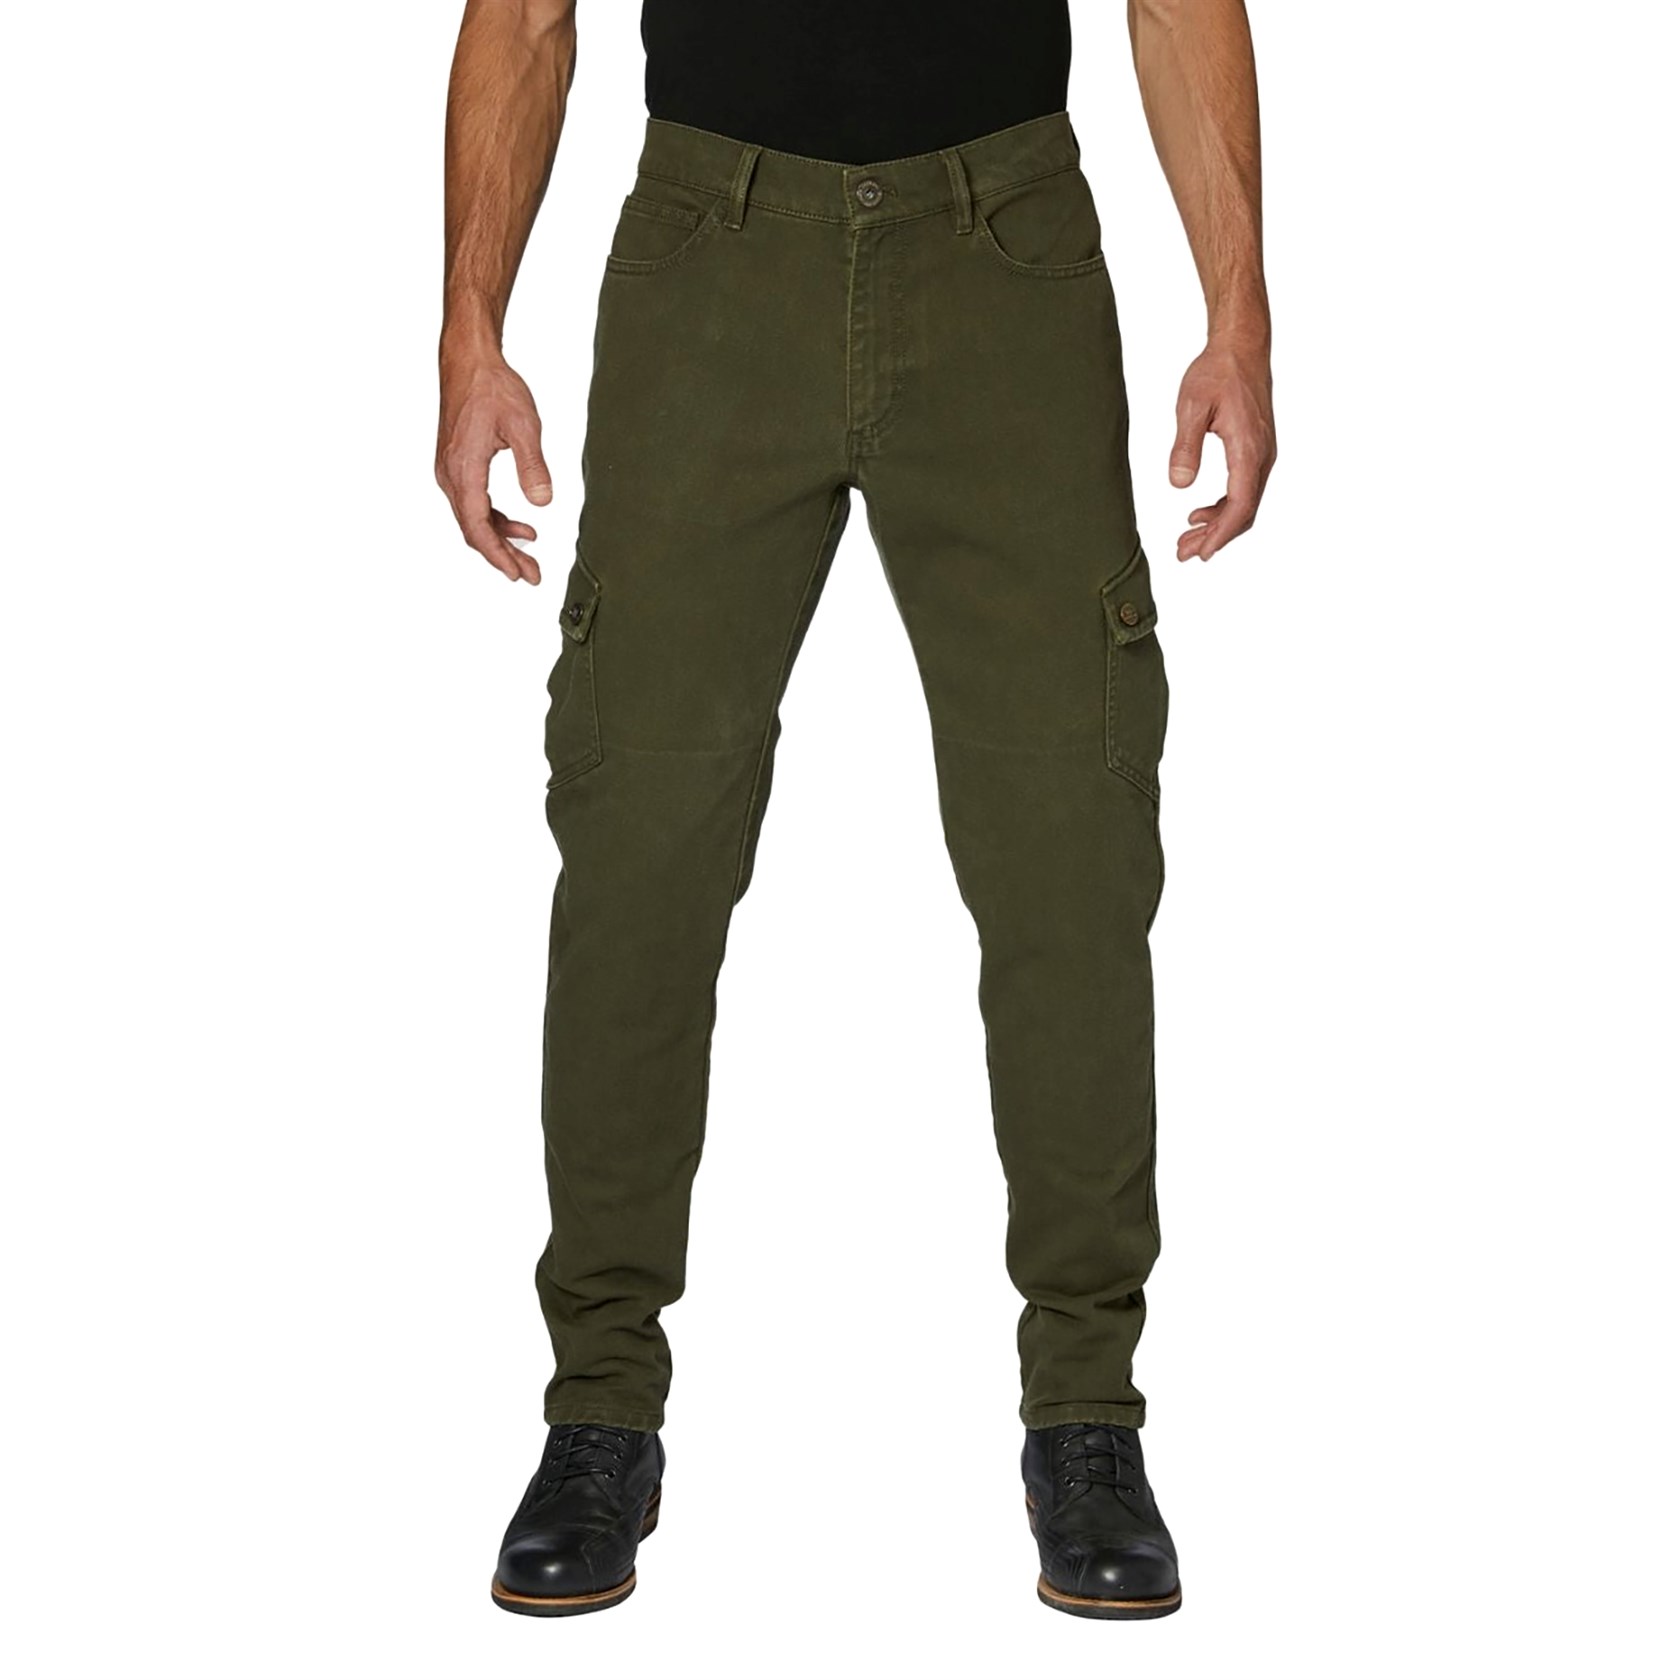 Cargo Fit Mid waist Fitted hems Track Pants, Light Brown